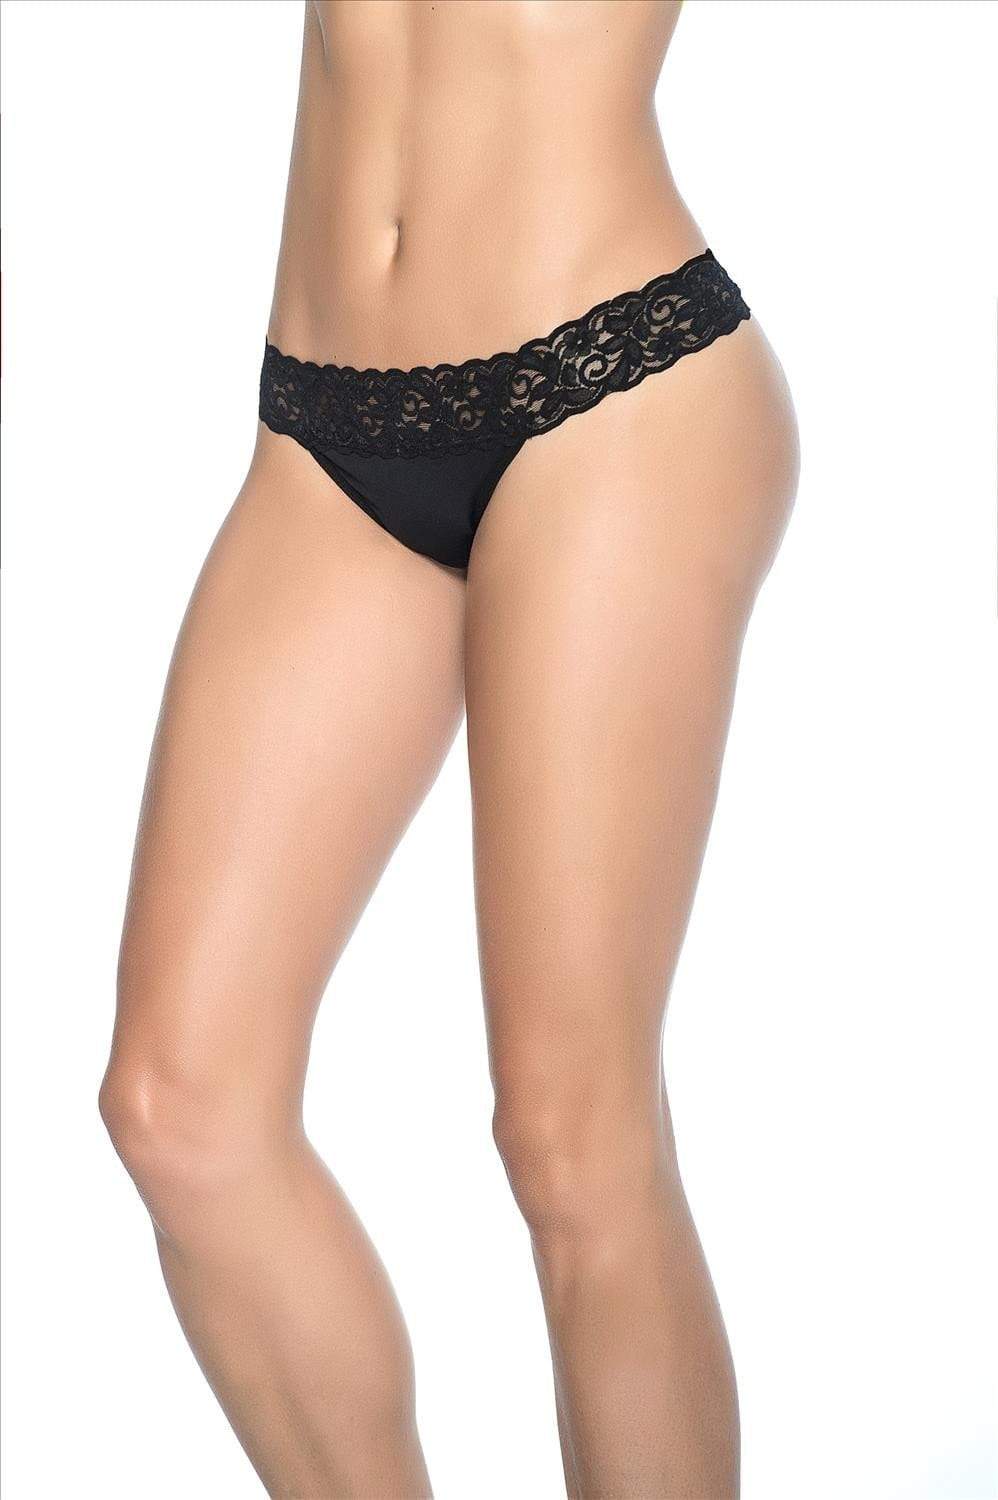 espiral Sexy Black Lace Thong Panty Underwear Lingerie  (Many Colors Available) Sexy Black Lace Thong Panty Underwear Lingerie  (Many Colors Available) Apparel & Accessories > Clothing > Underwear & Socks > Underwear